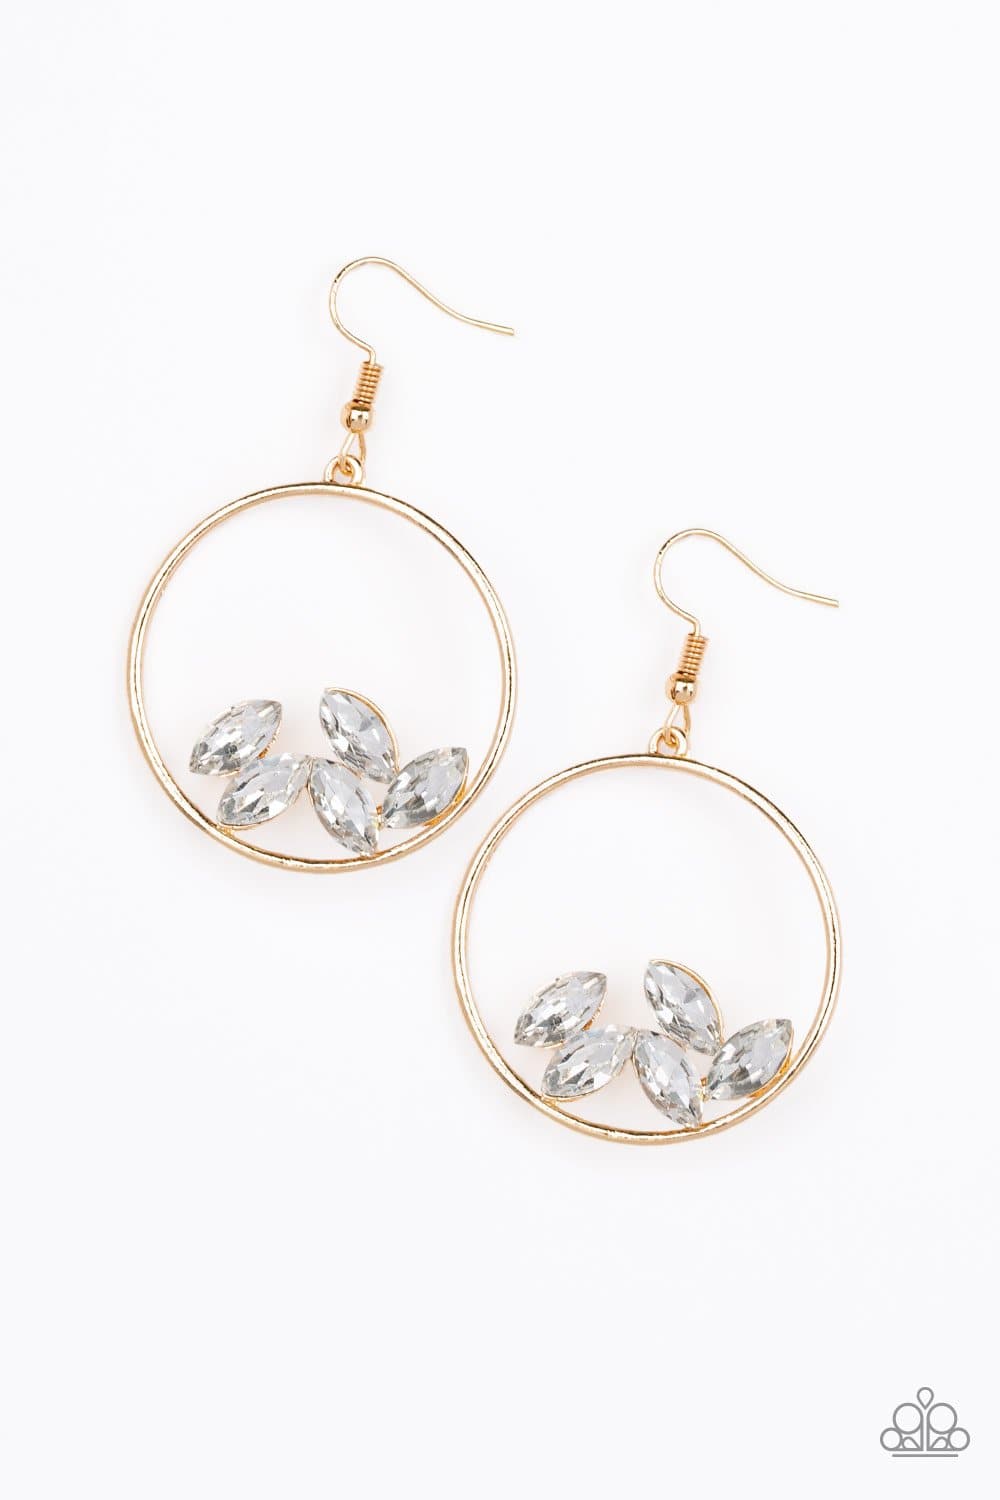 D336 - Cue The Confetti White Earrings by Paparazzi Accessories on Fancy5Fashion.com